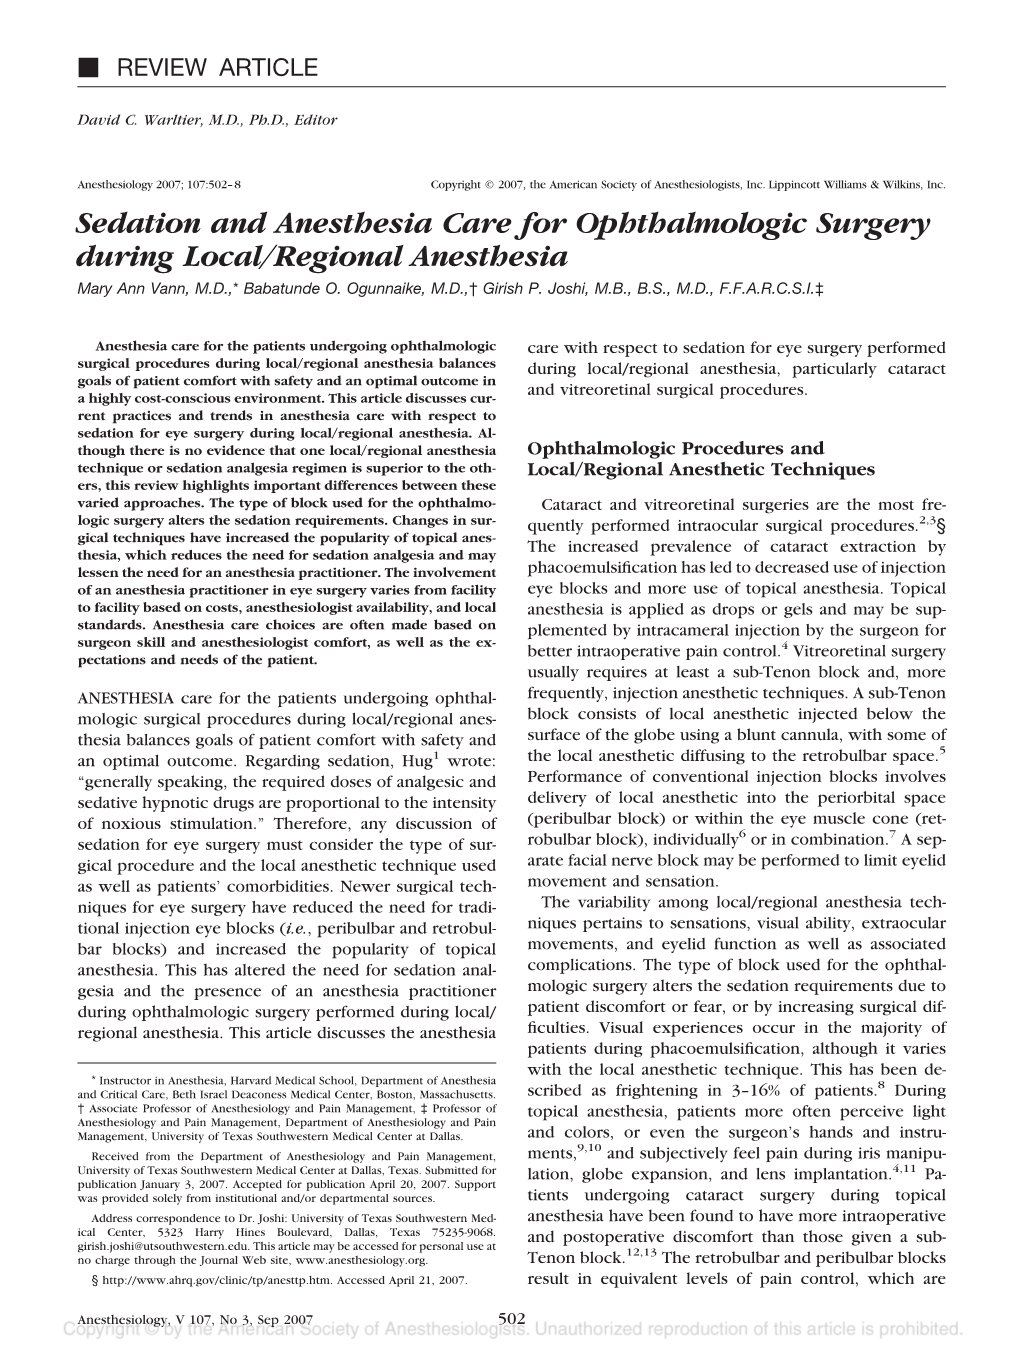 Sedation and Anesthesia Care for Ophthalmologic Surgery During Local/Regional Anesthesia Mary Ann Vann, M.D.,* Babatunde O